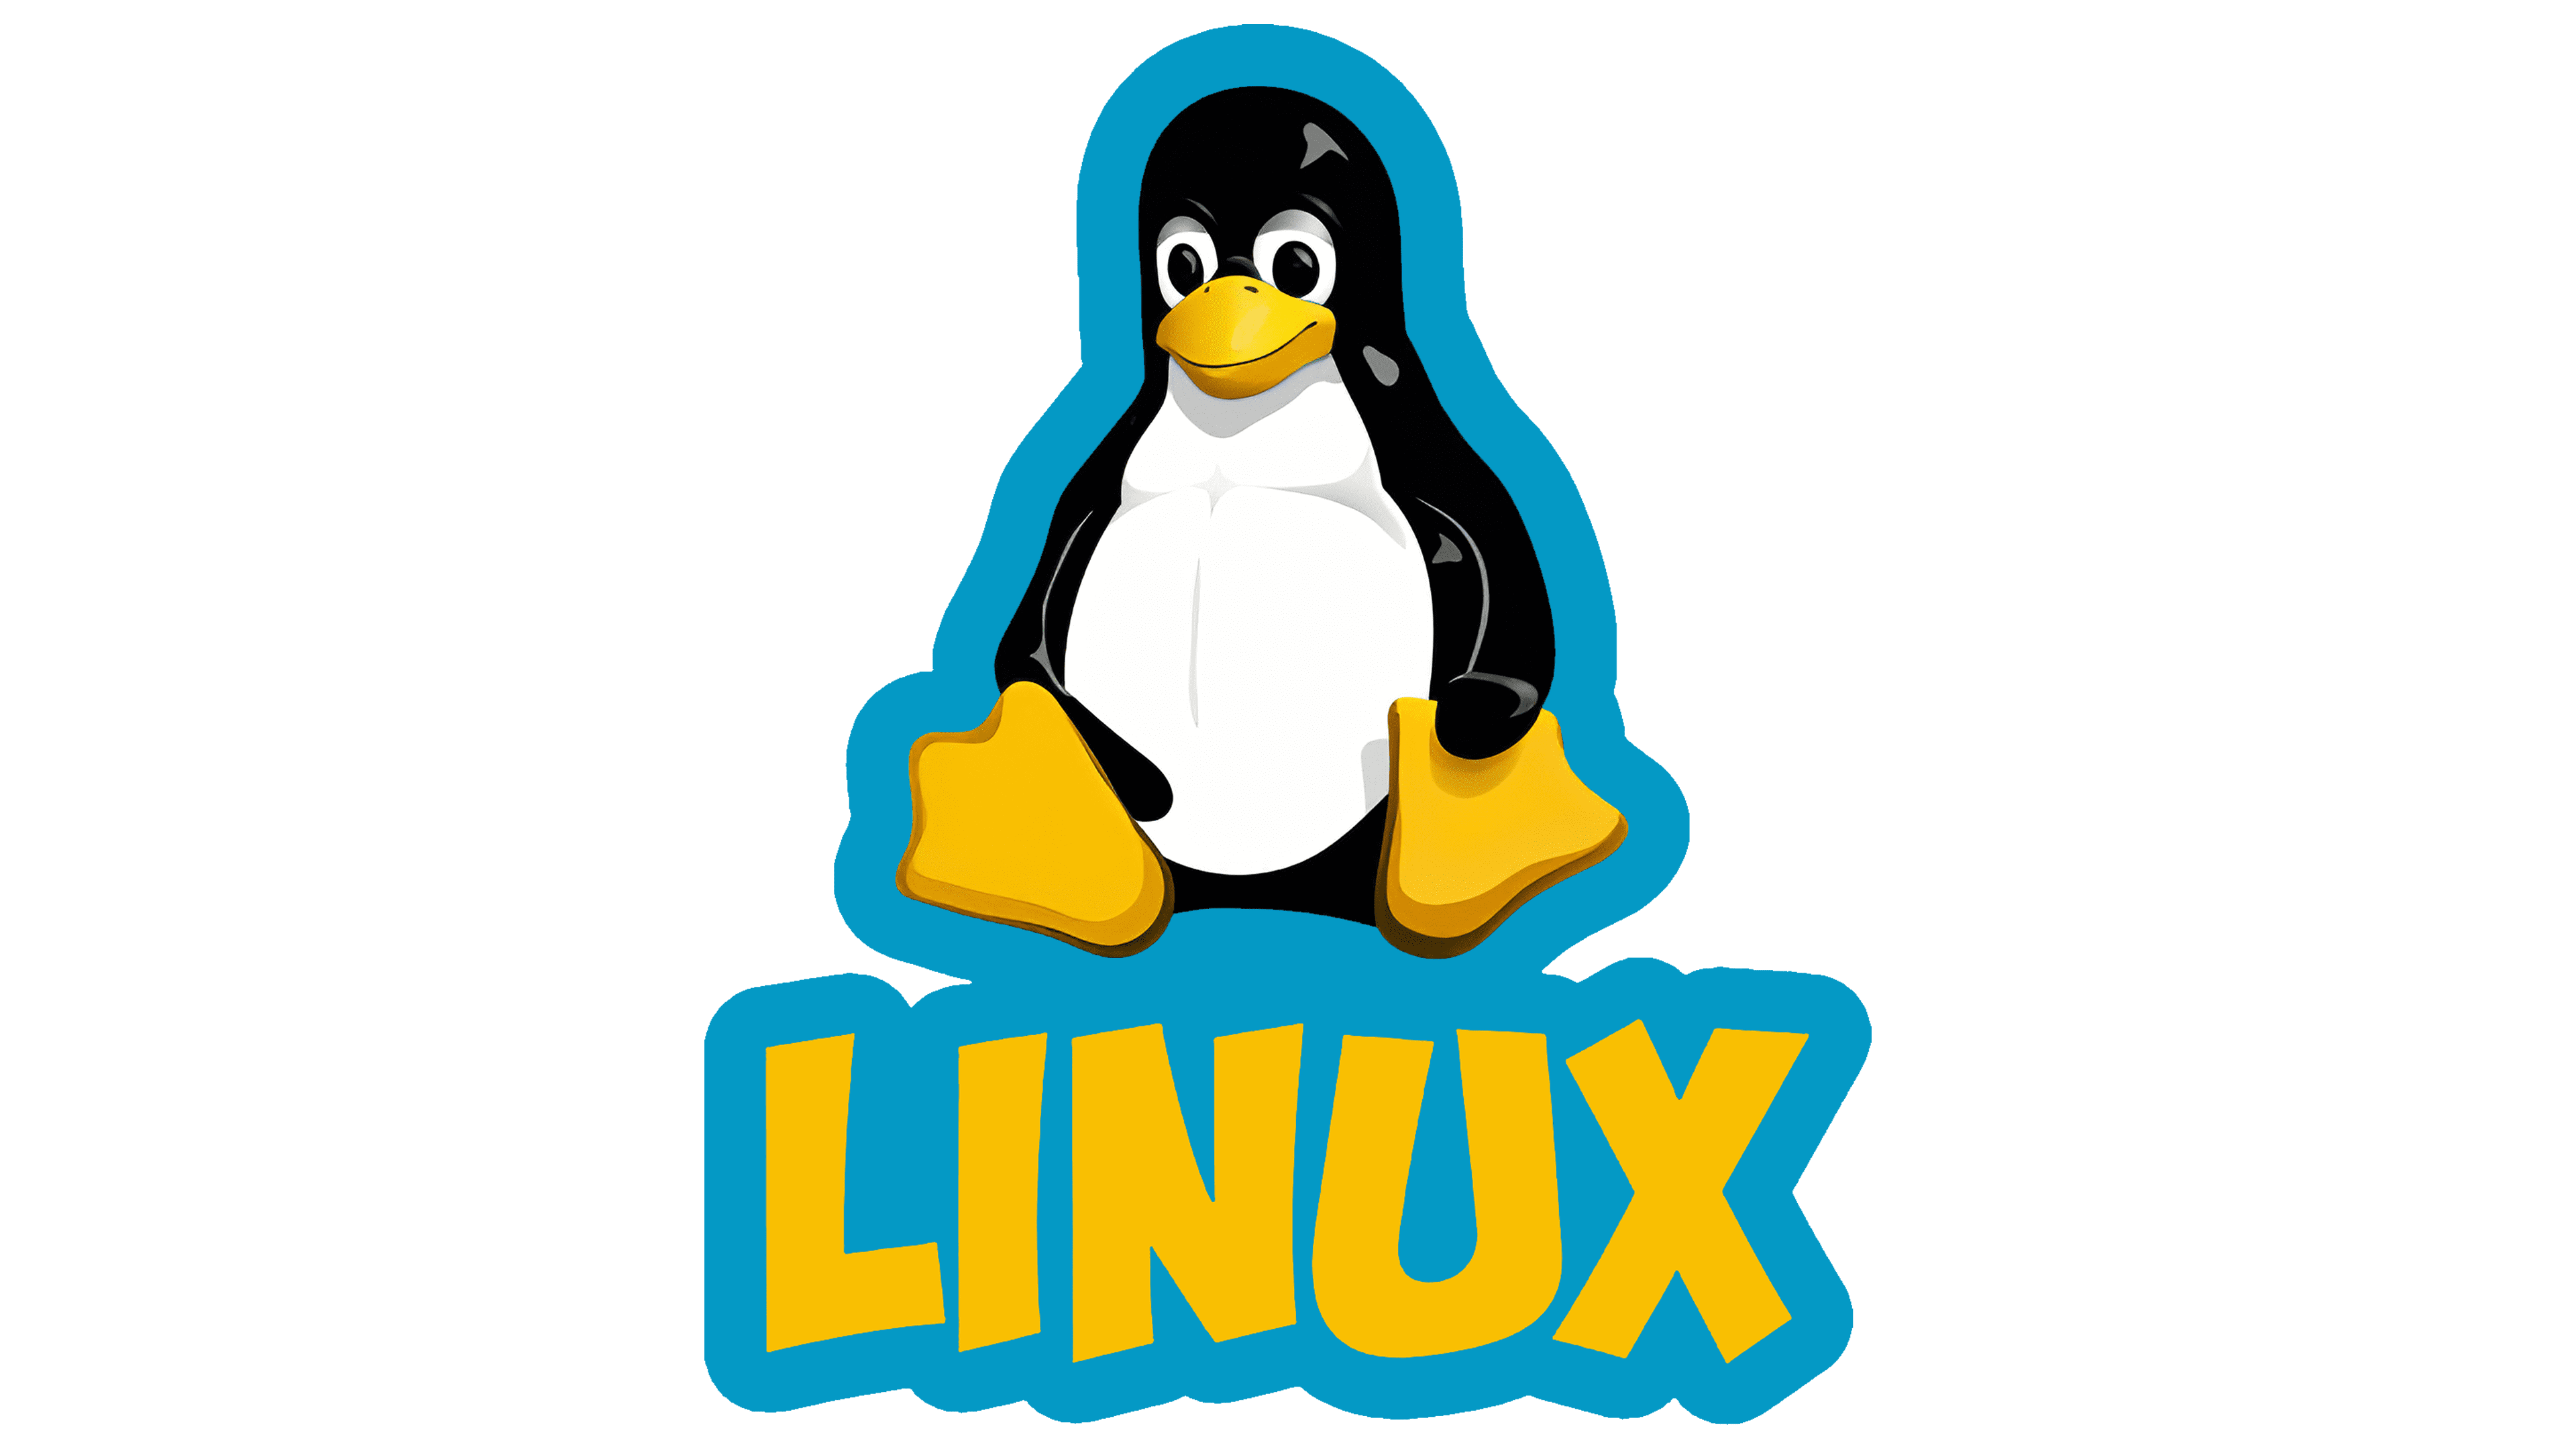 Just Me | Linux Basico